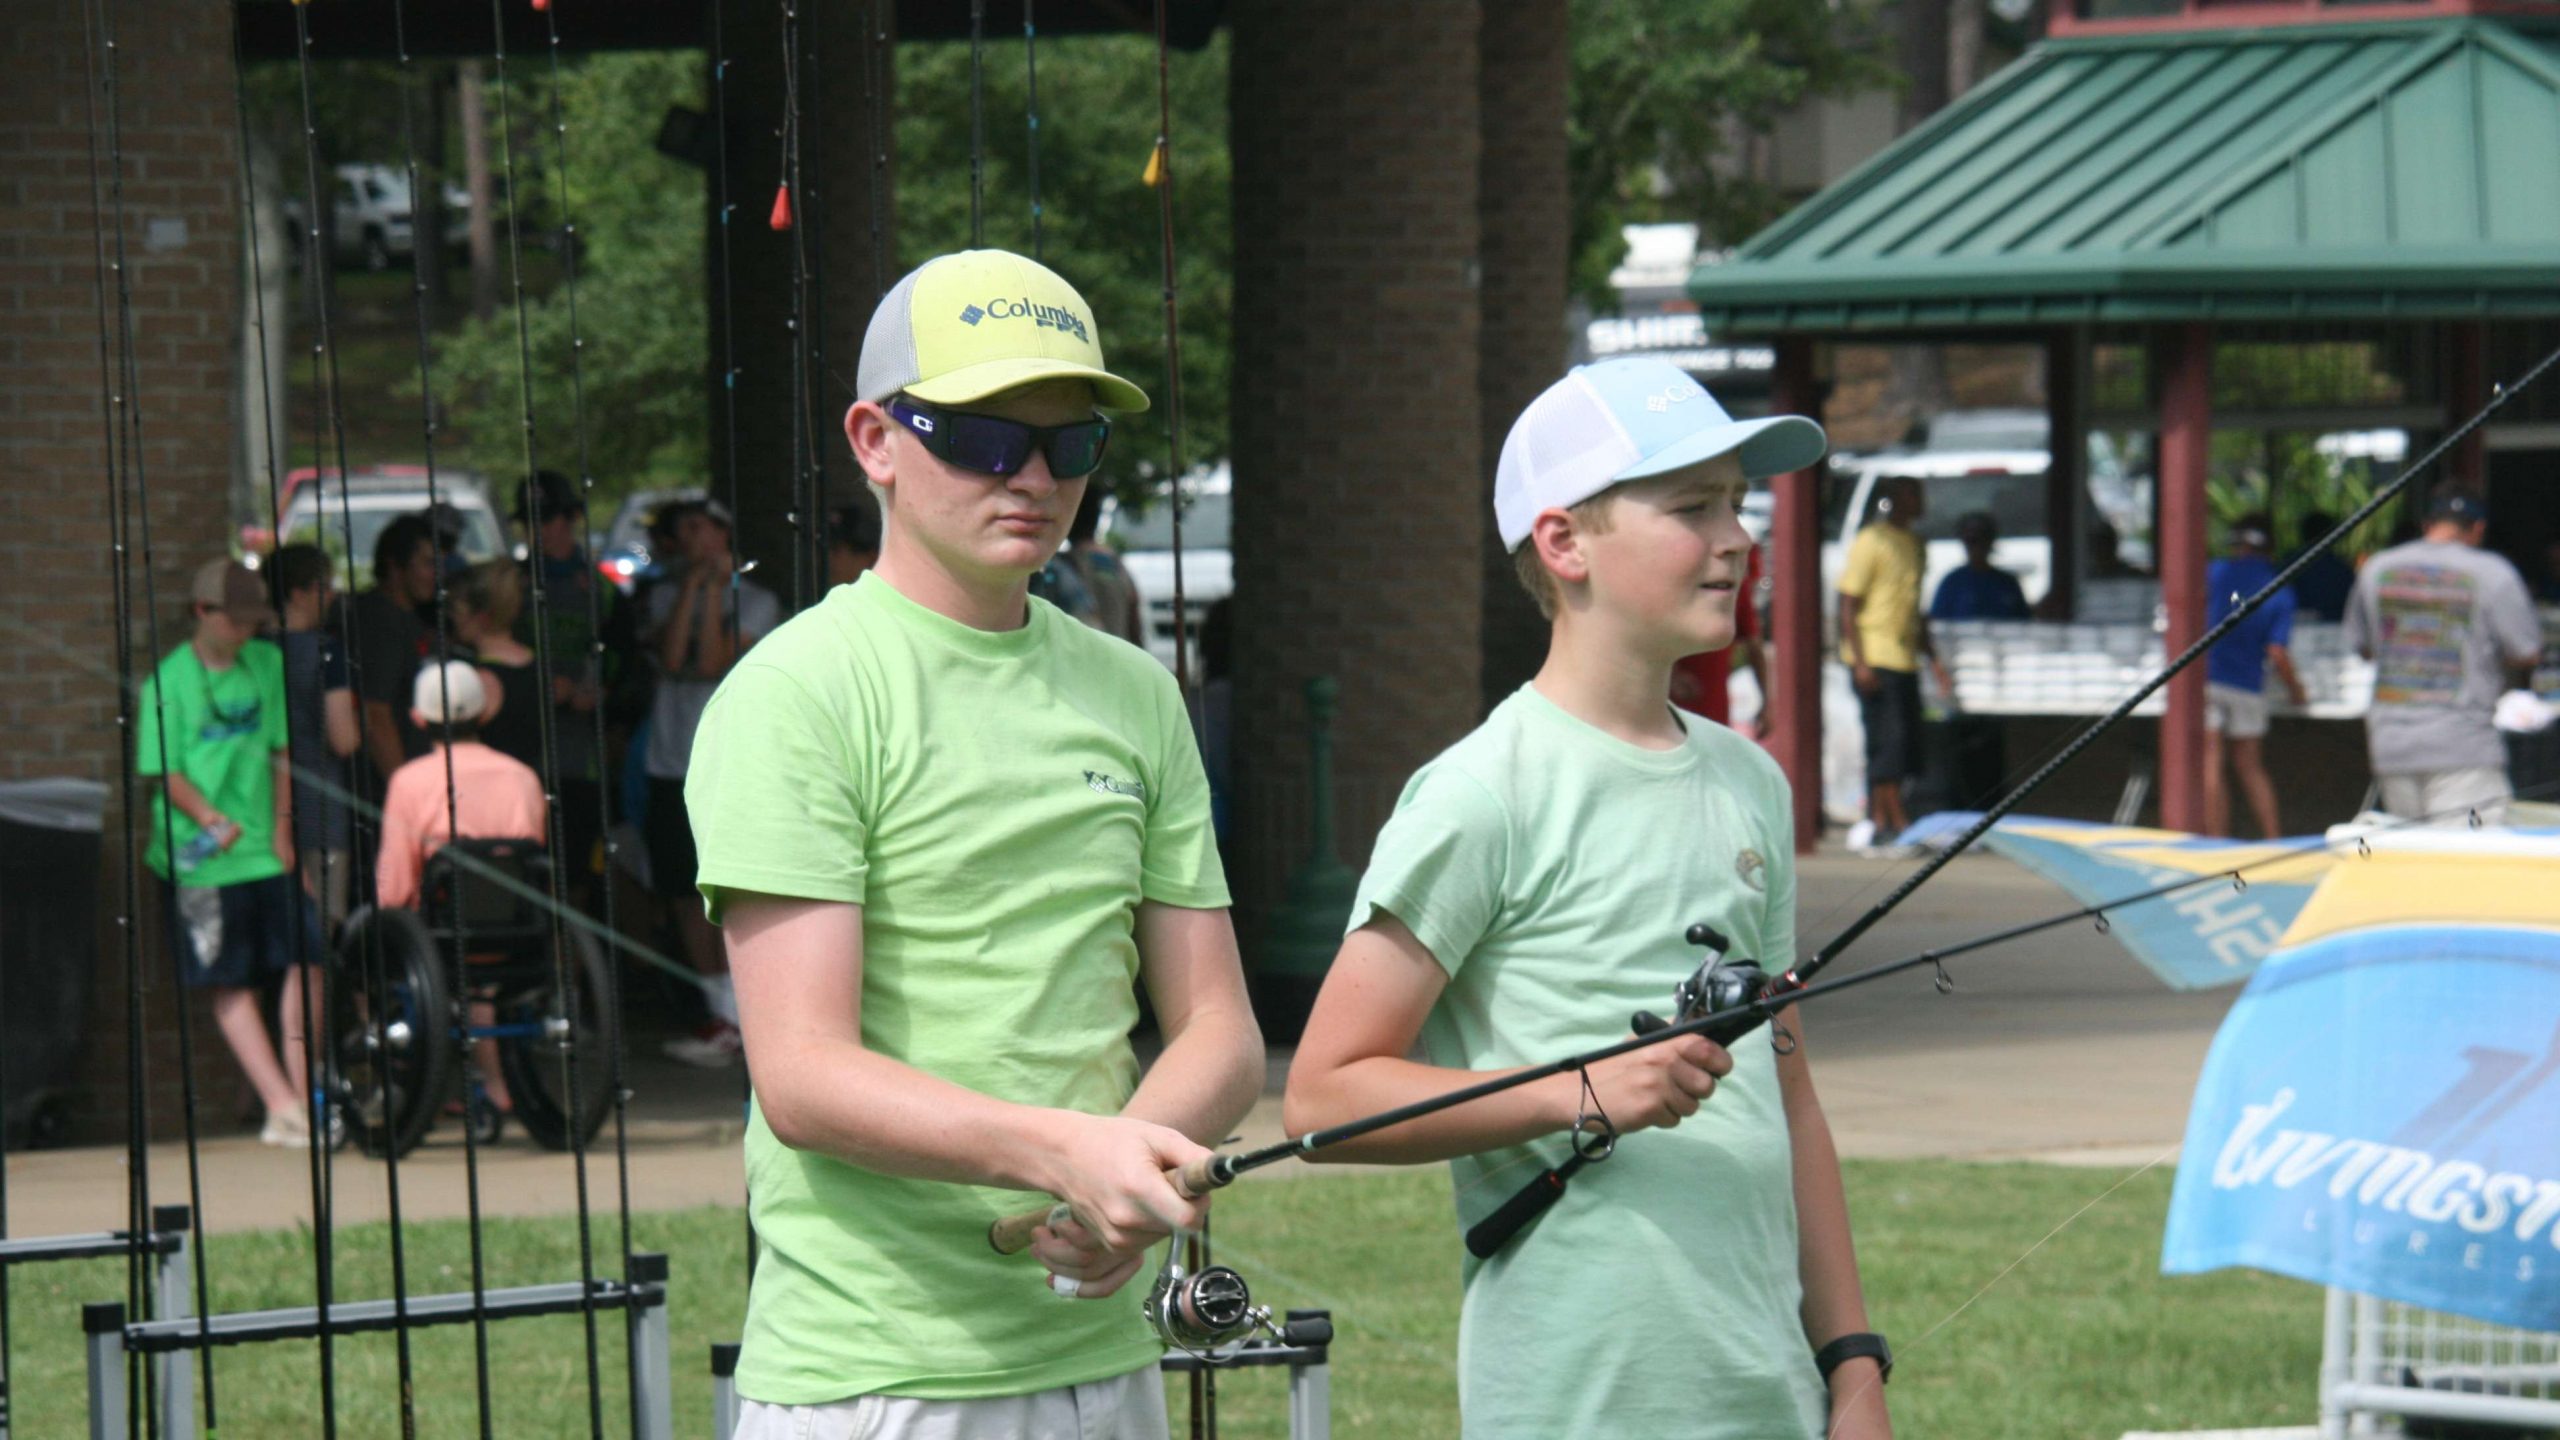 Some young anglers participate their casts at a Shimano station at registration.